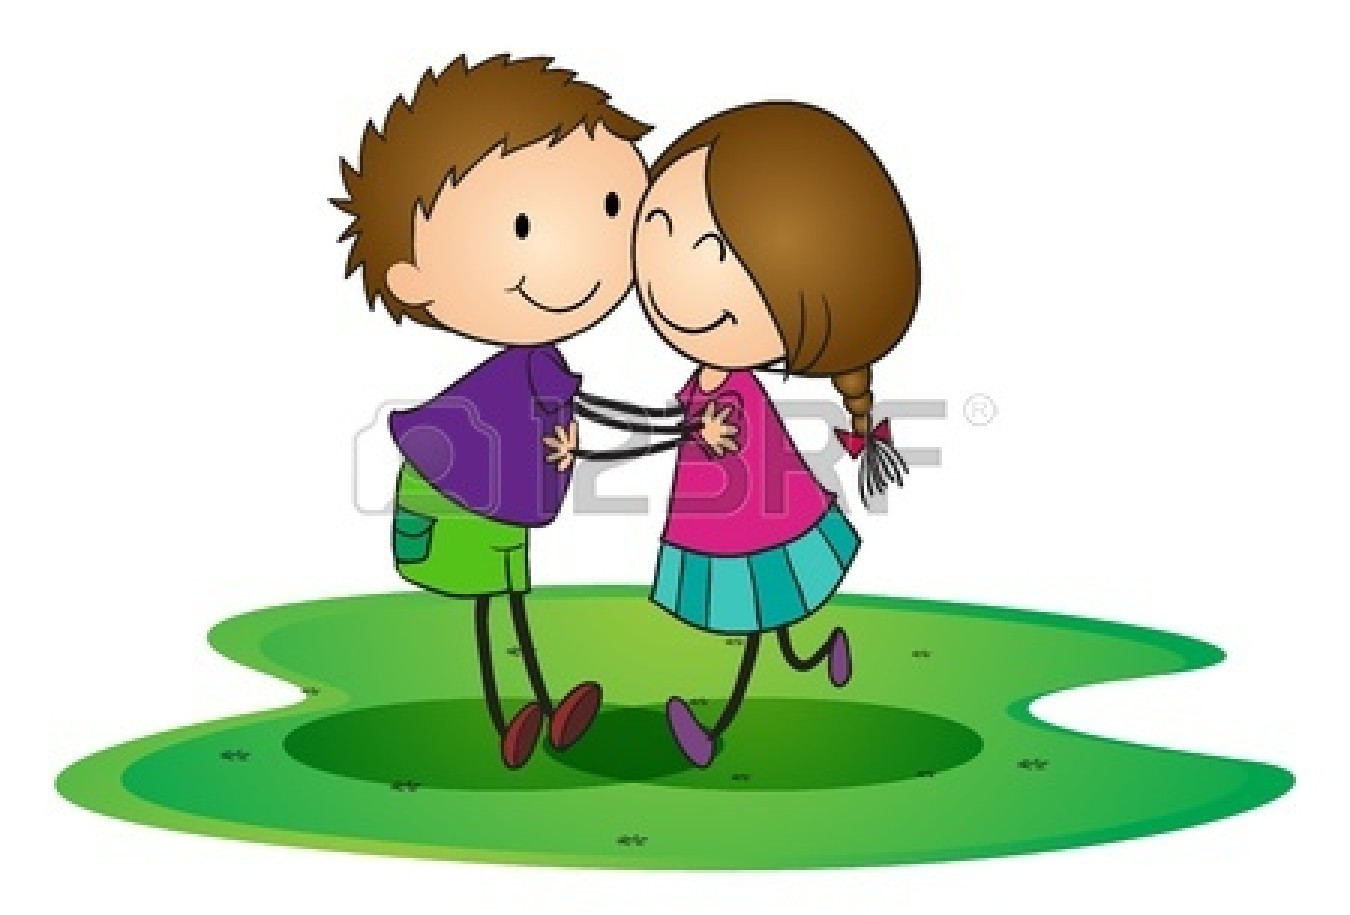 Friends Hugging Drawing   Clipart Panda   Free Clipart Images